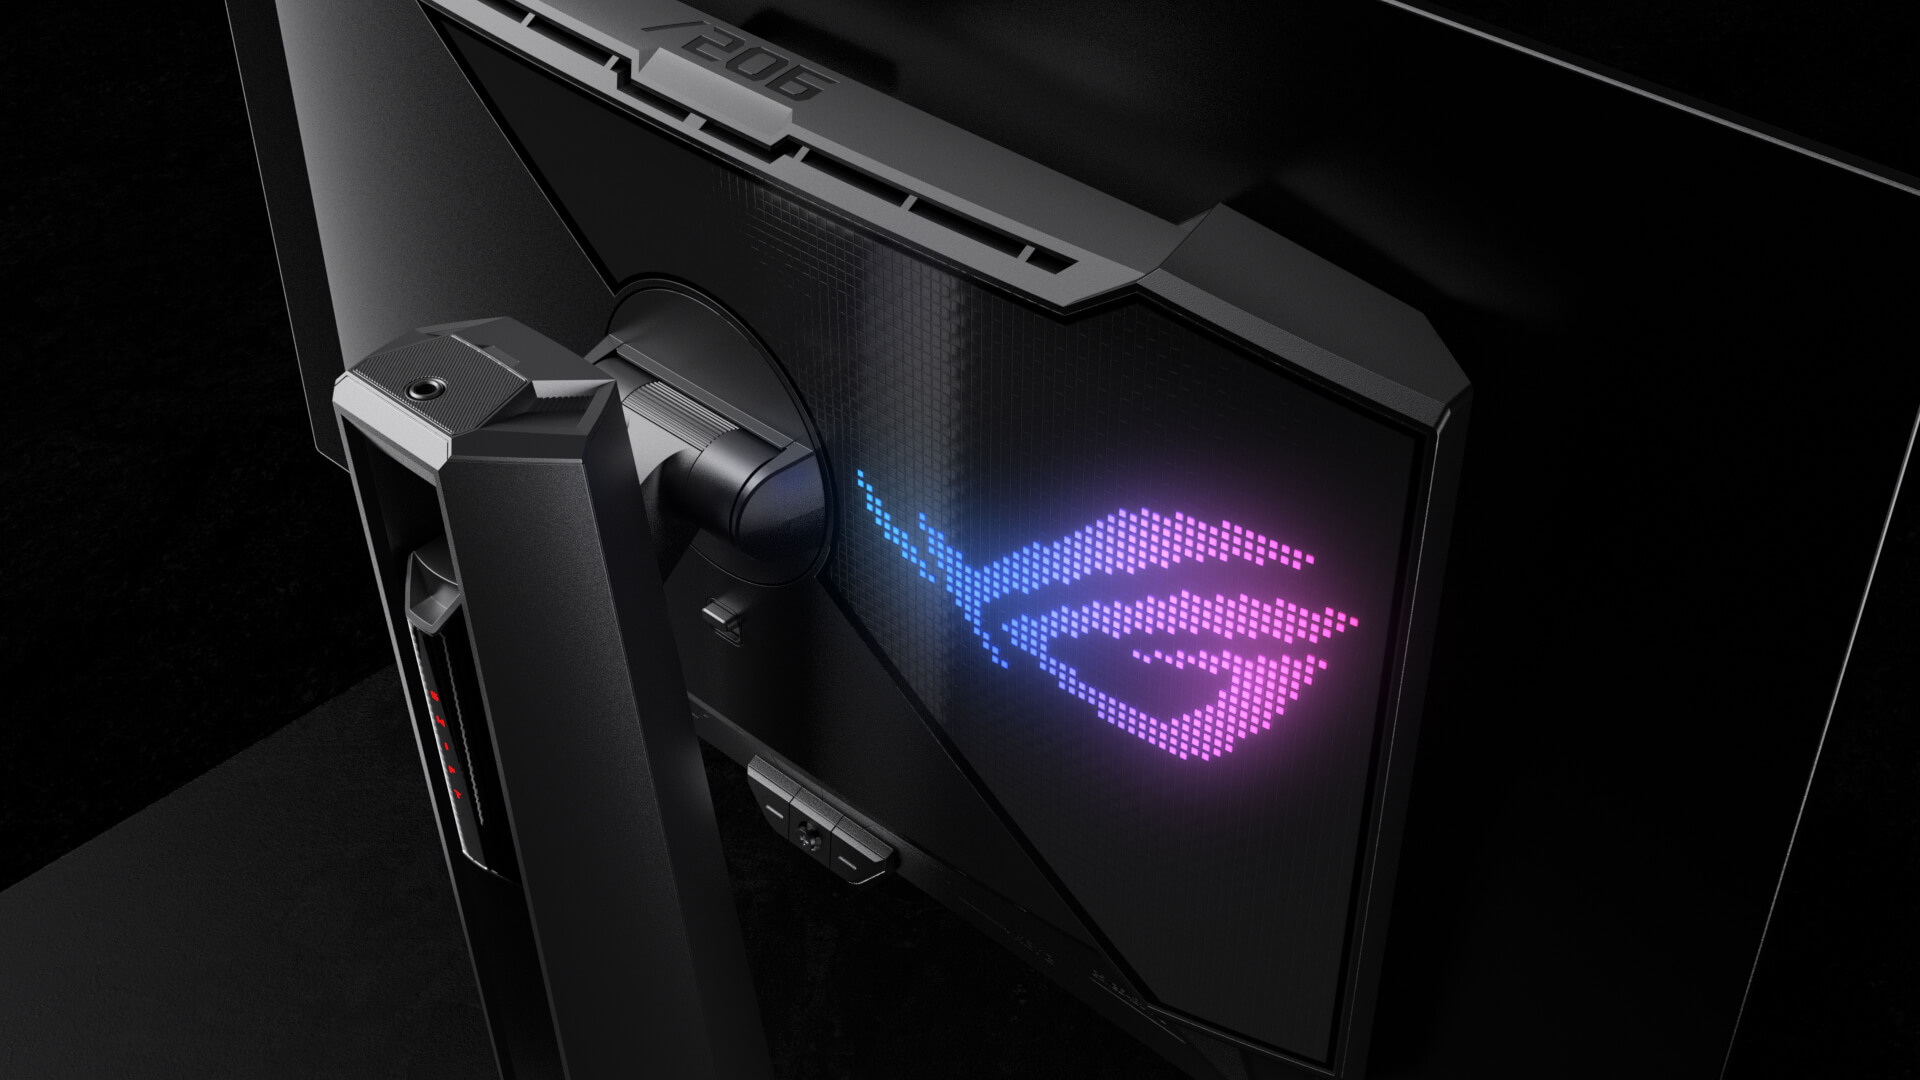 The rear panel of PG27AQDM has a futuristic, cyberpunk-inspired aesthetic.